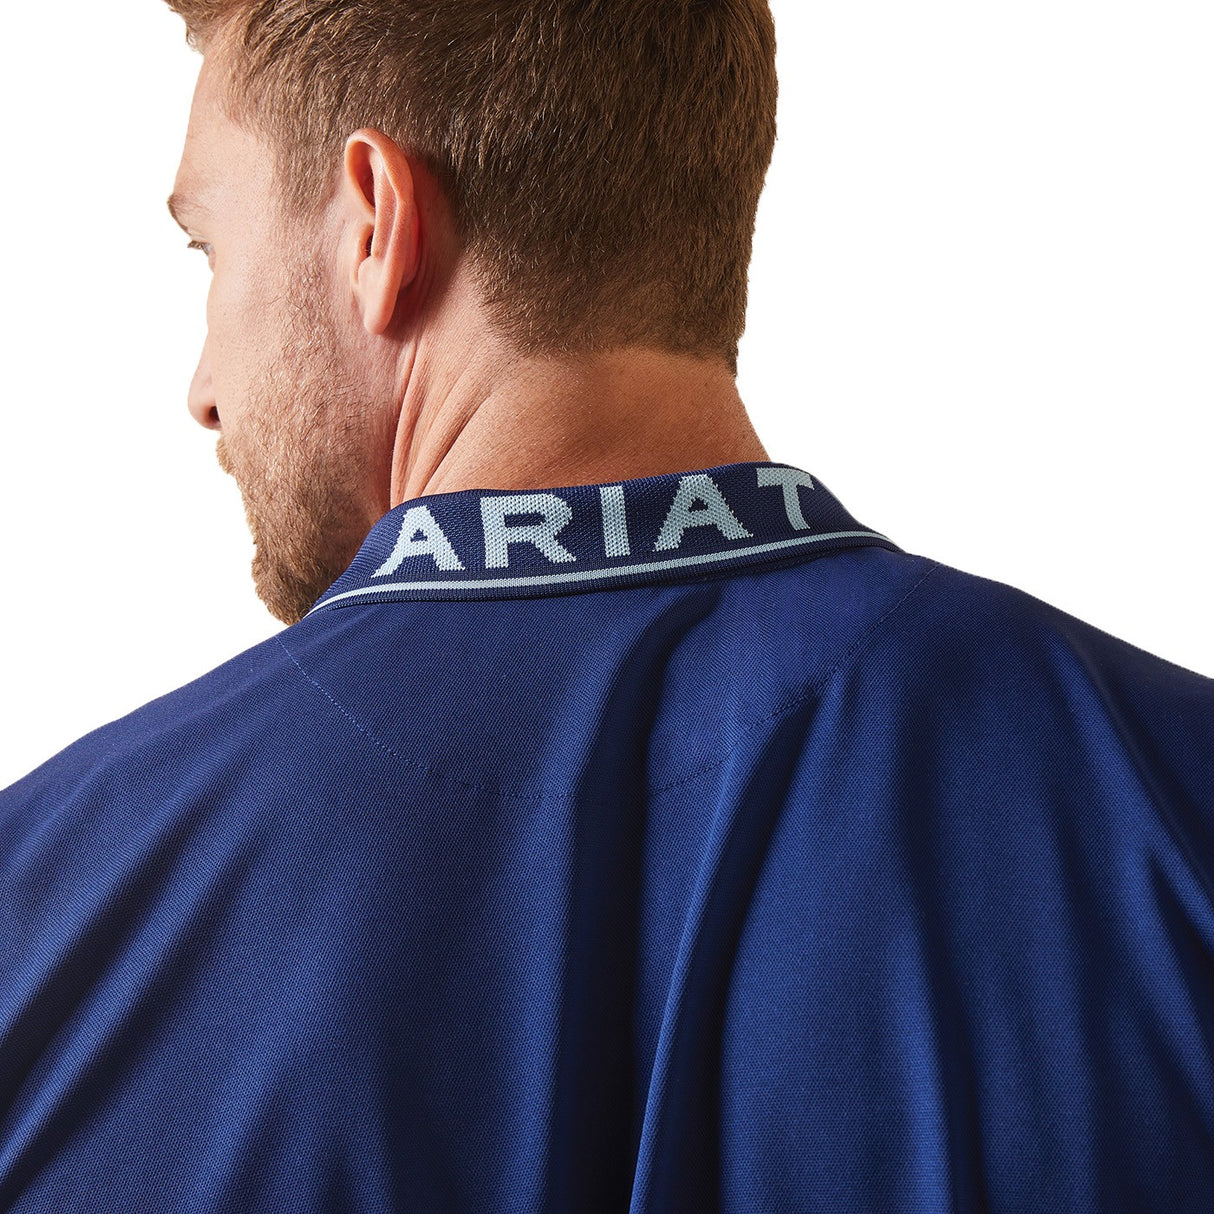 Ariat Logo Fitted Polo - Men's